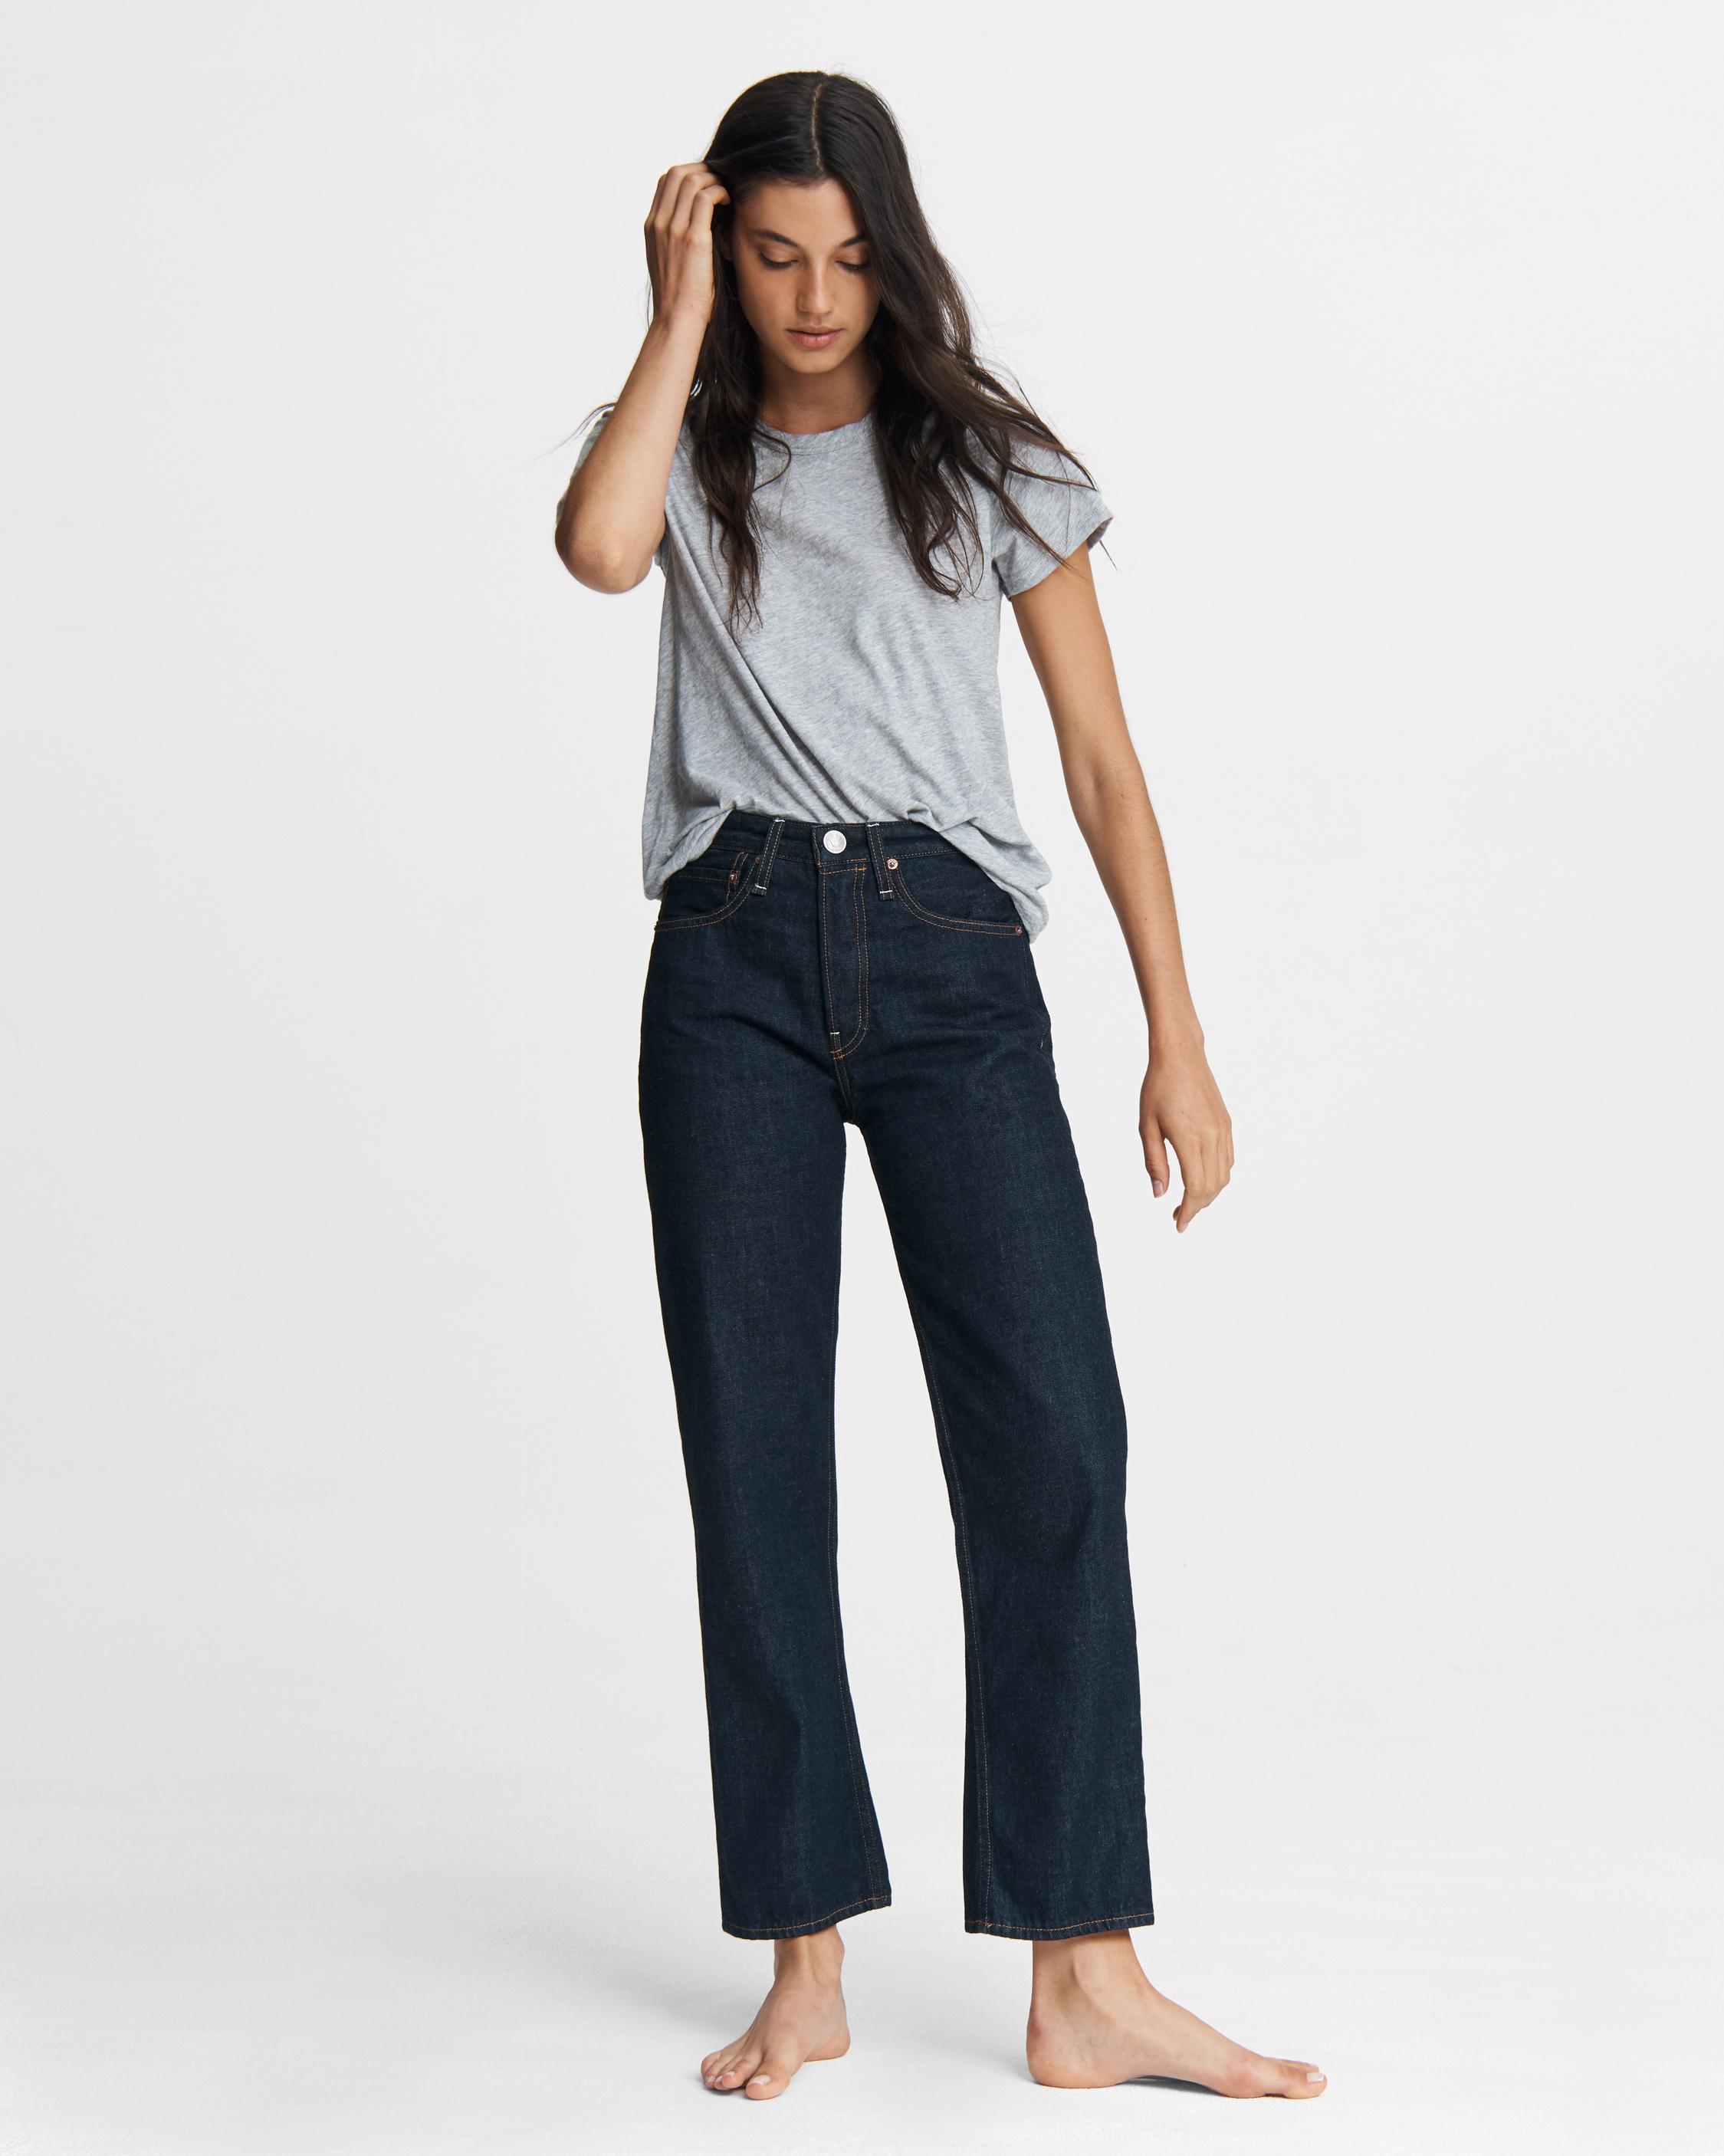 A Guide To The Best Petite Jeans For Short Legs